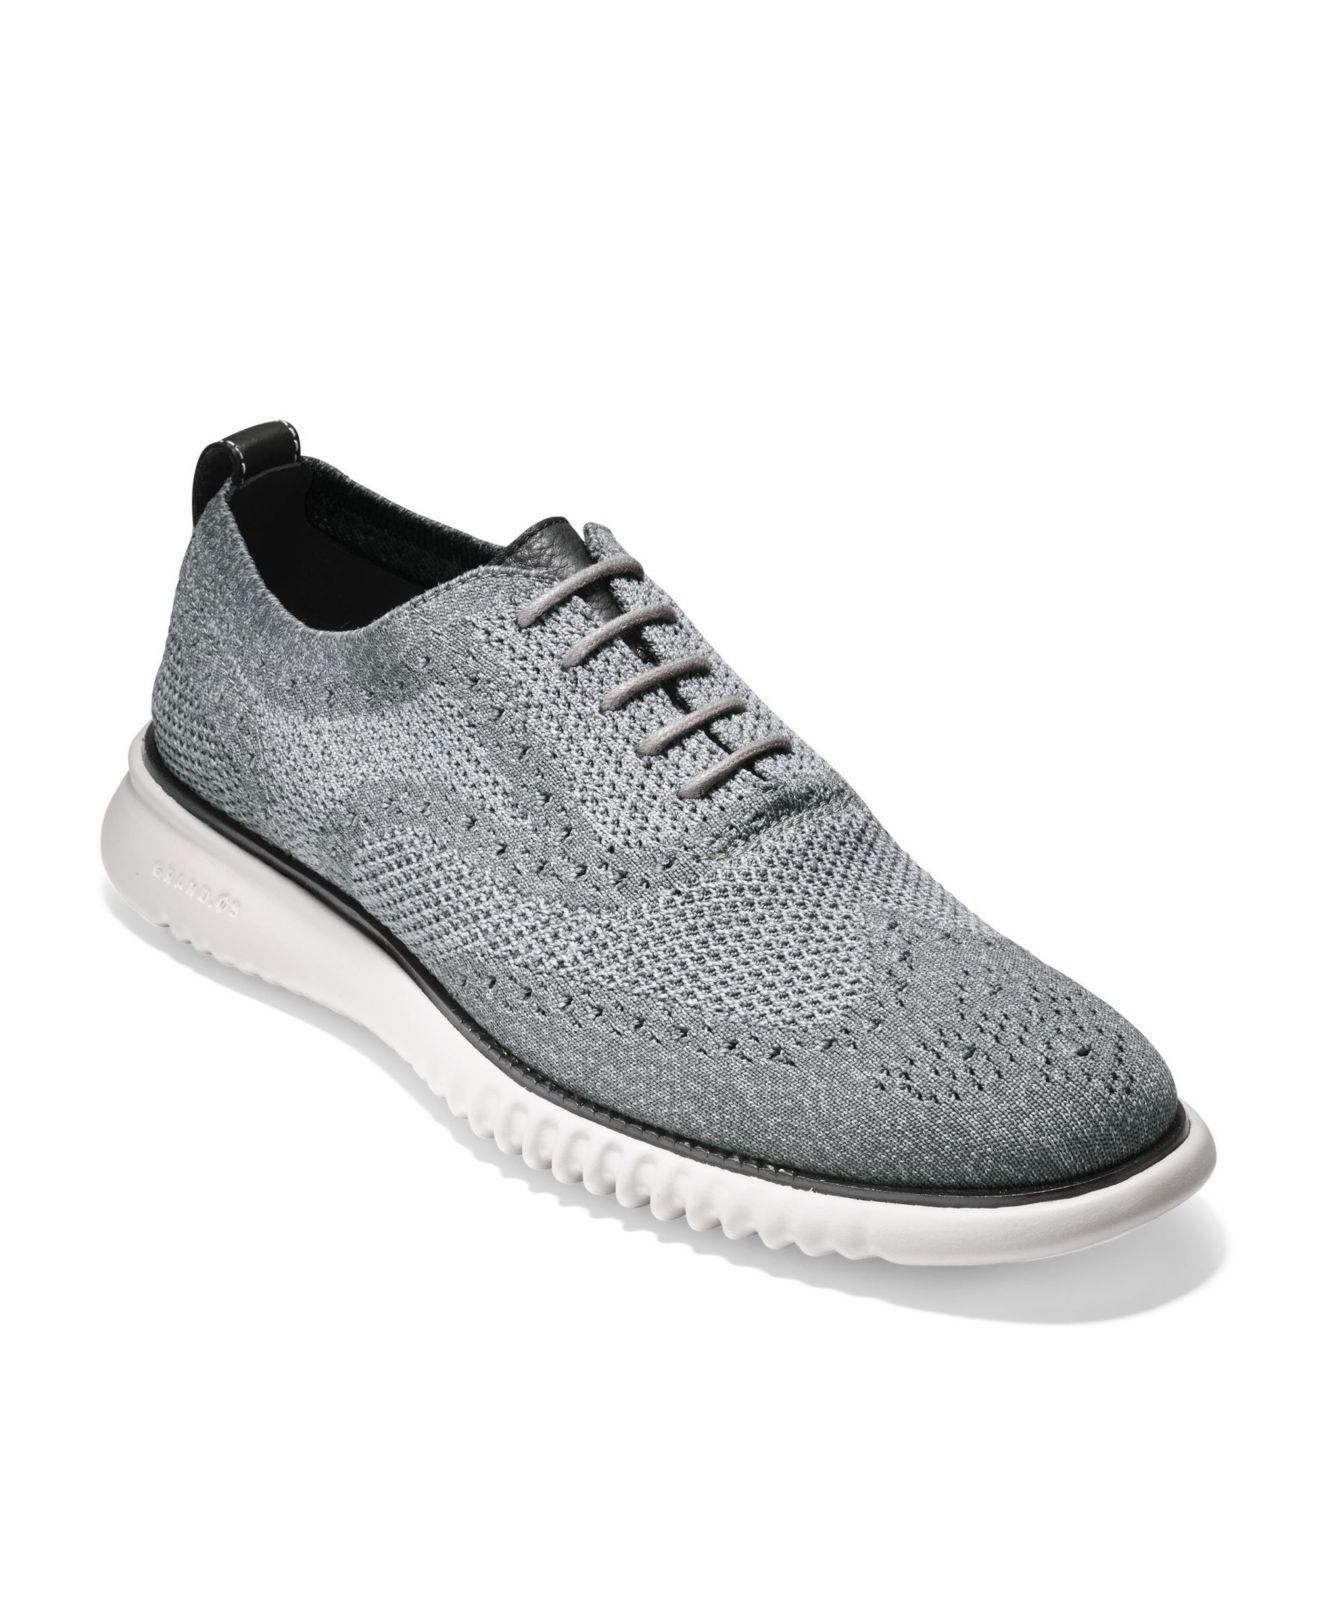 Cole Haan 2.zerogrand Stitchlite Oxford in Gray for Men - Save 59 